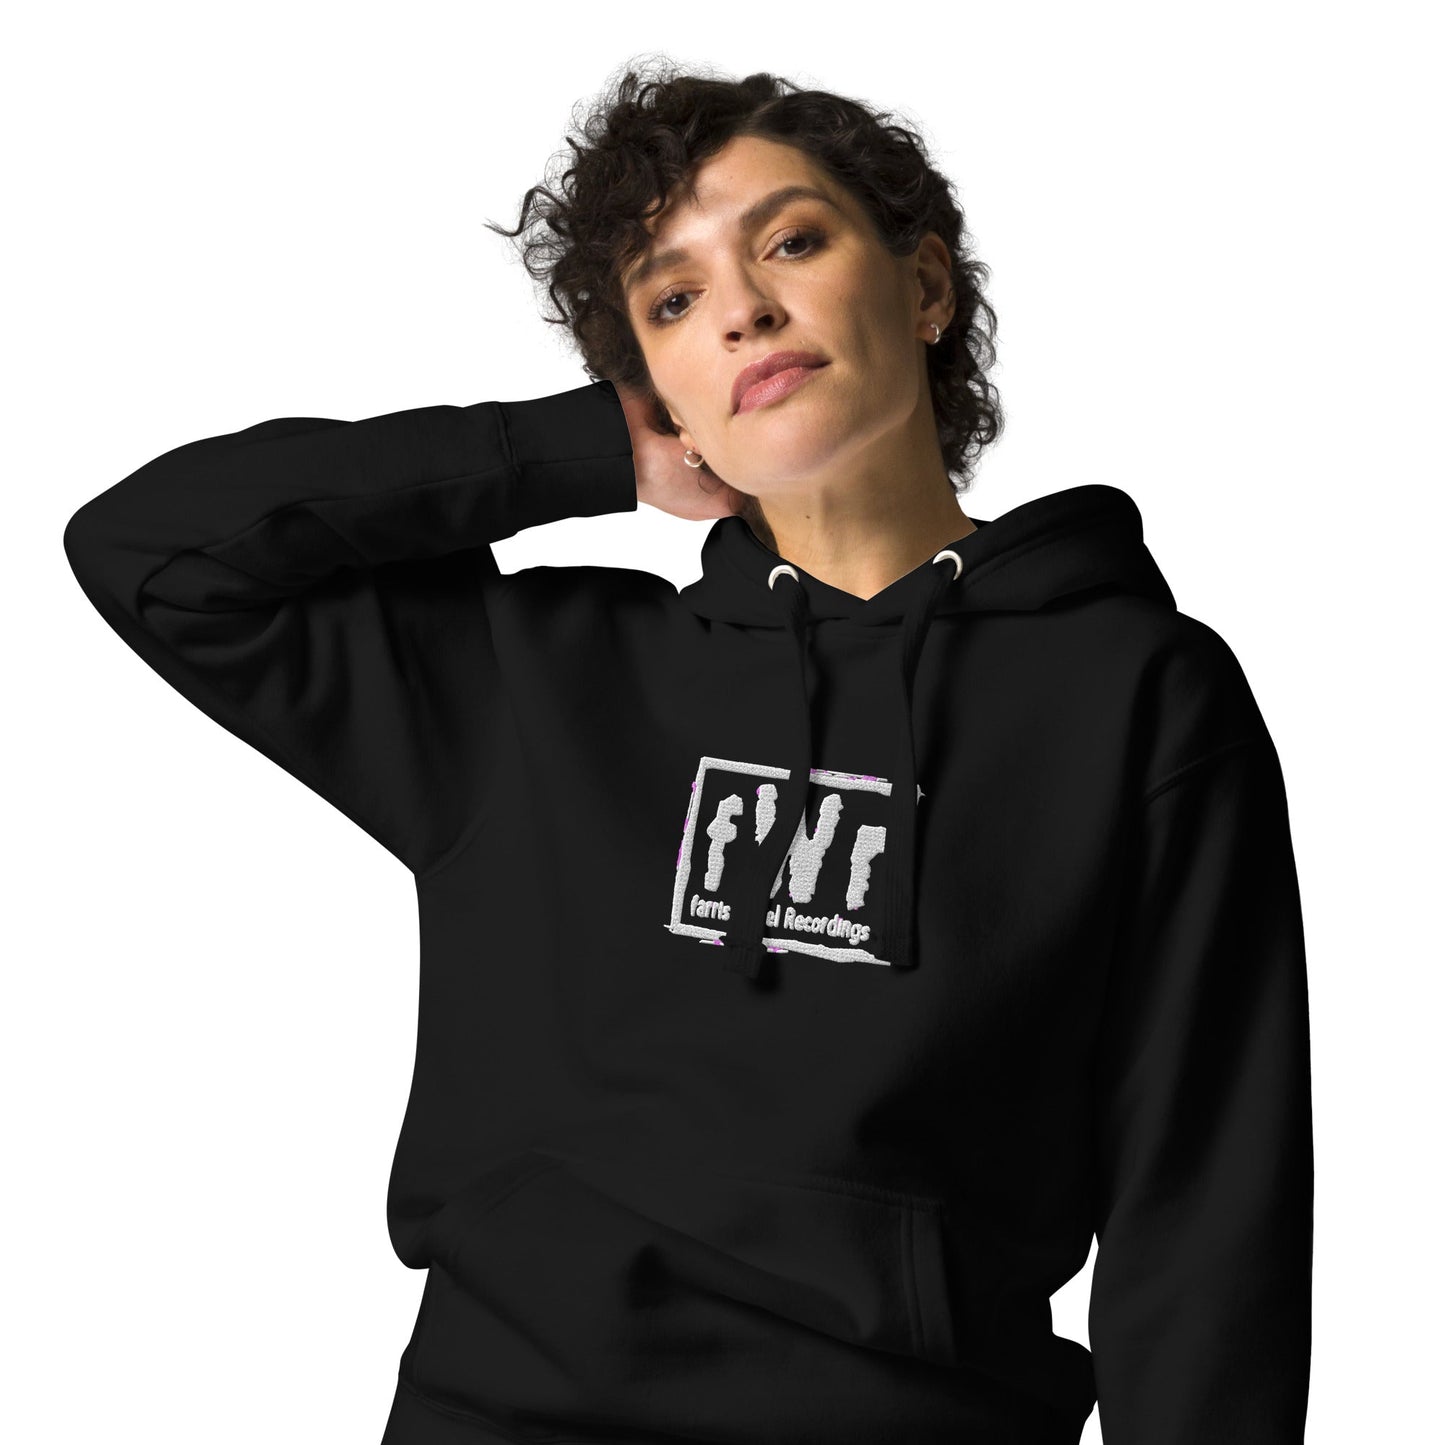 Farris Wheel fWr Unisex Soft Hoodie - BeExtra! Apparel & More